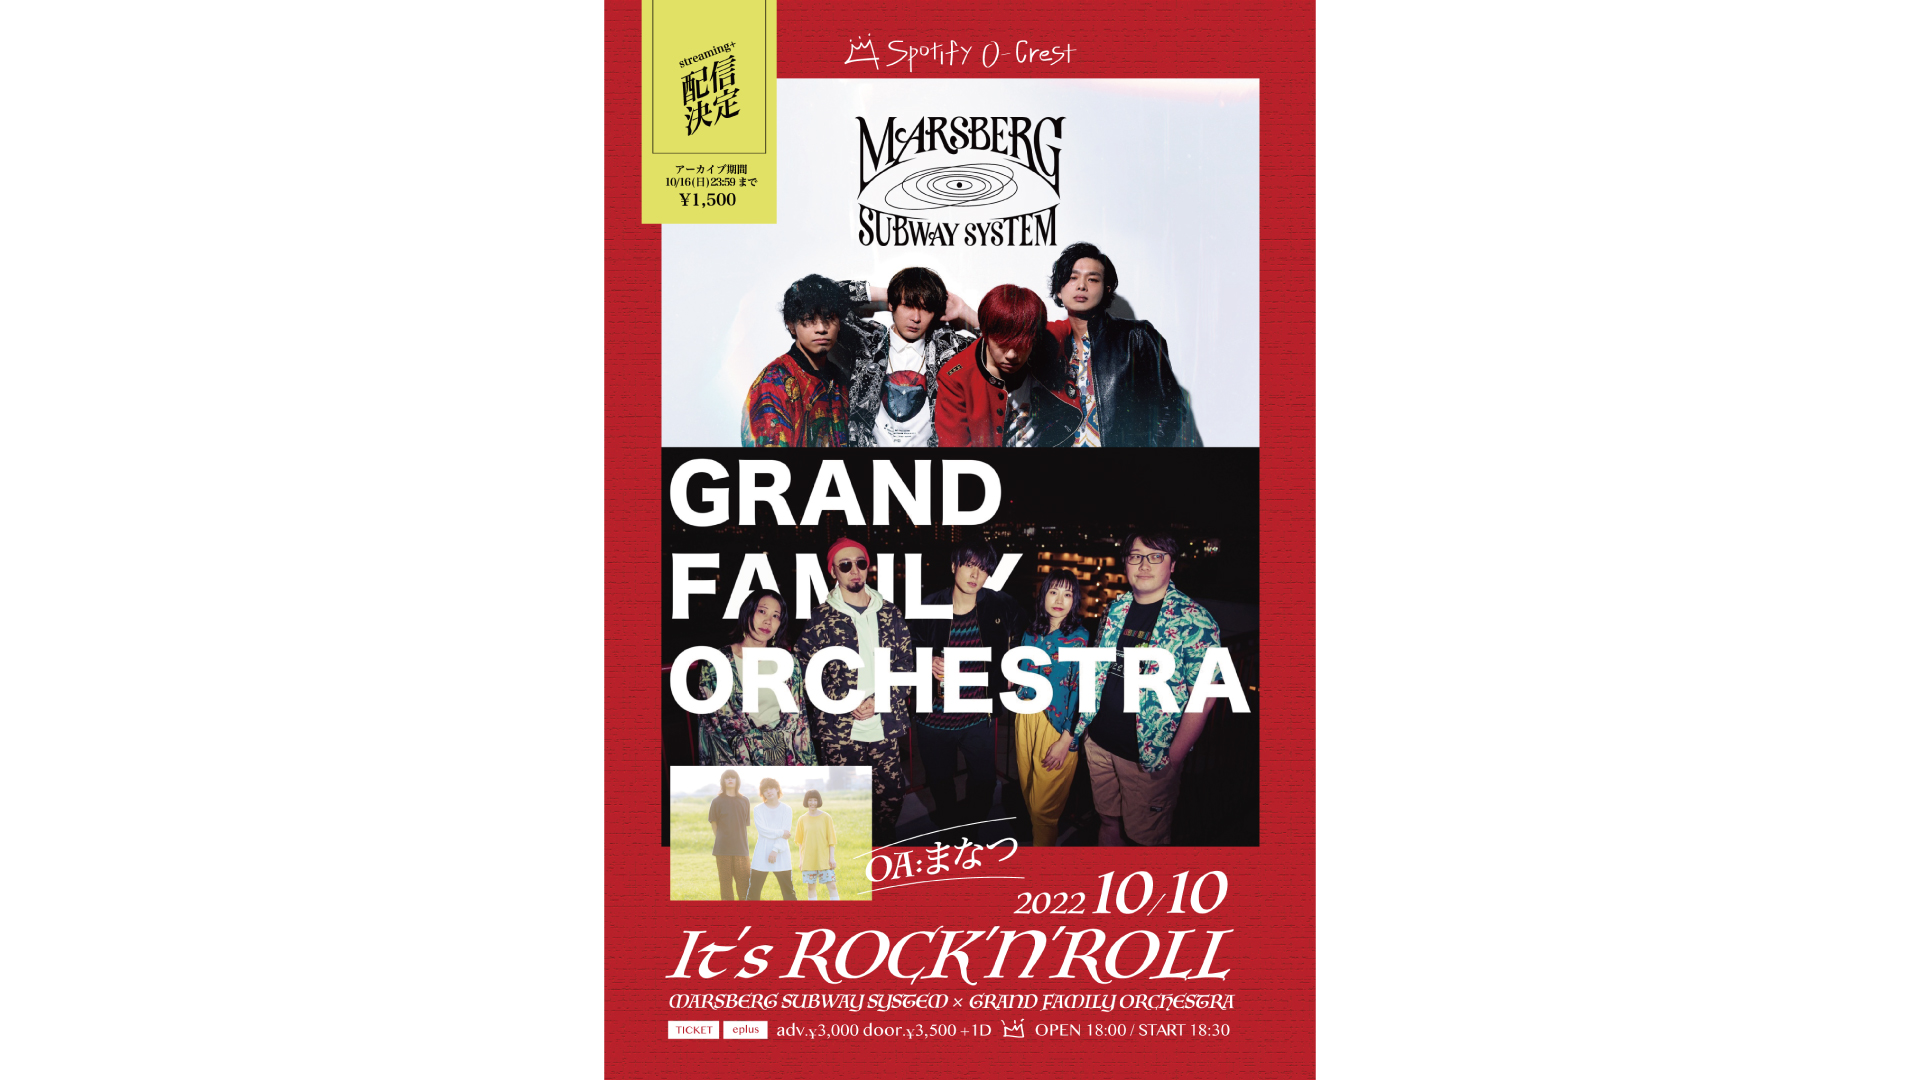 It's ROCK'N'ROLL MARSBERG SUBWAY SYSTEM GRAND FAMILY ORCHESTRA ま